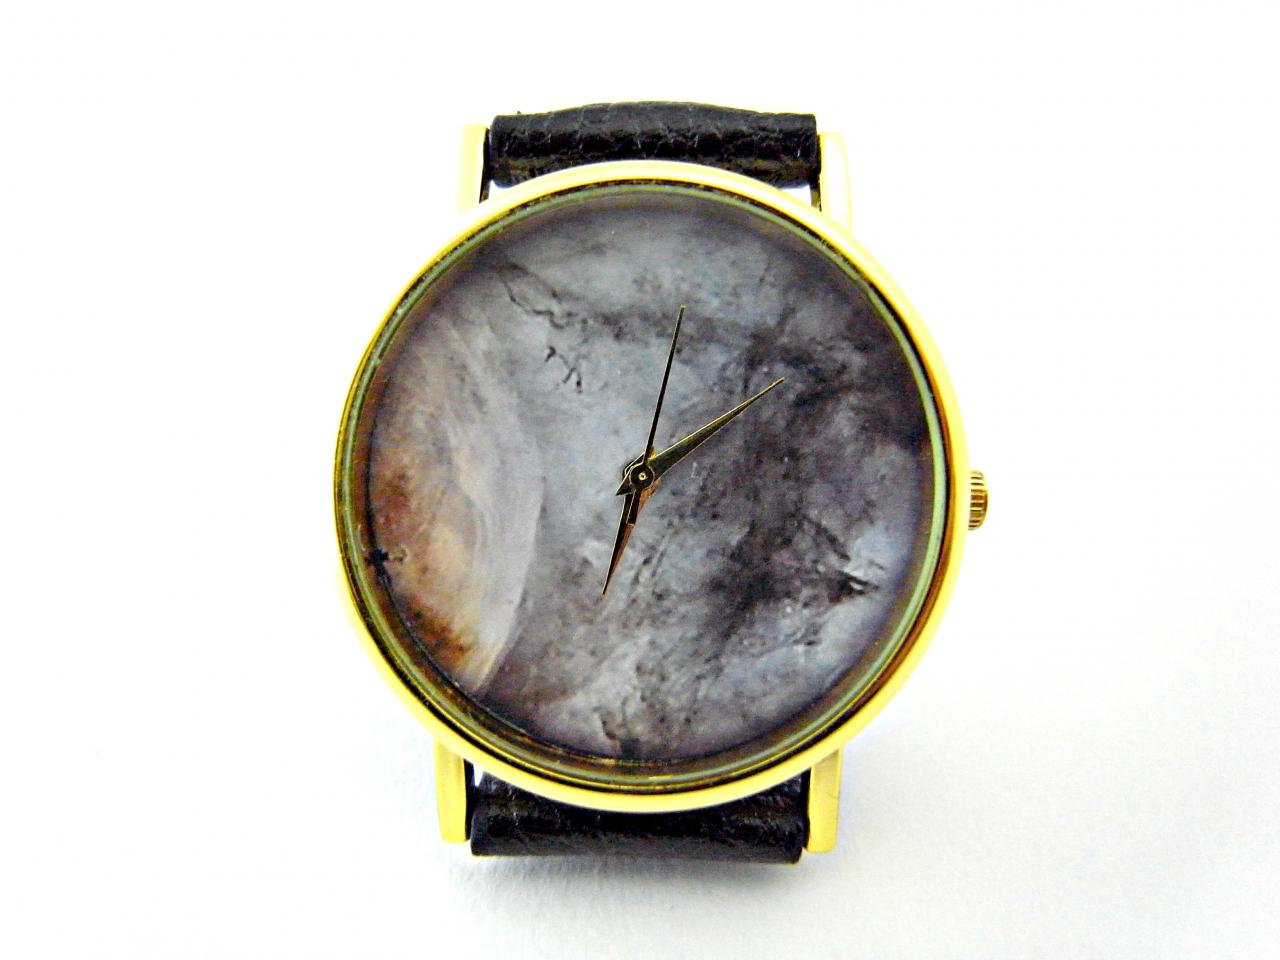 Galaxy Space Leather Wrist Watches, Woman Man Lady Unisex Watch, Genuine Leather Handmade Unique Watch #16